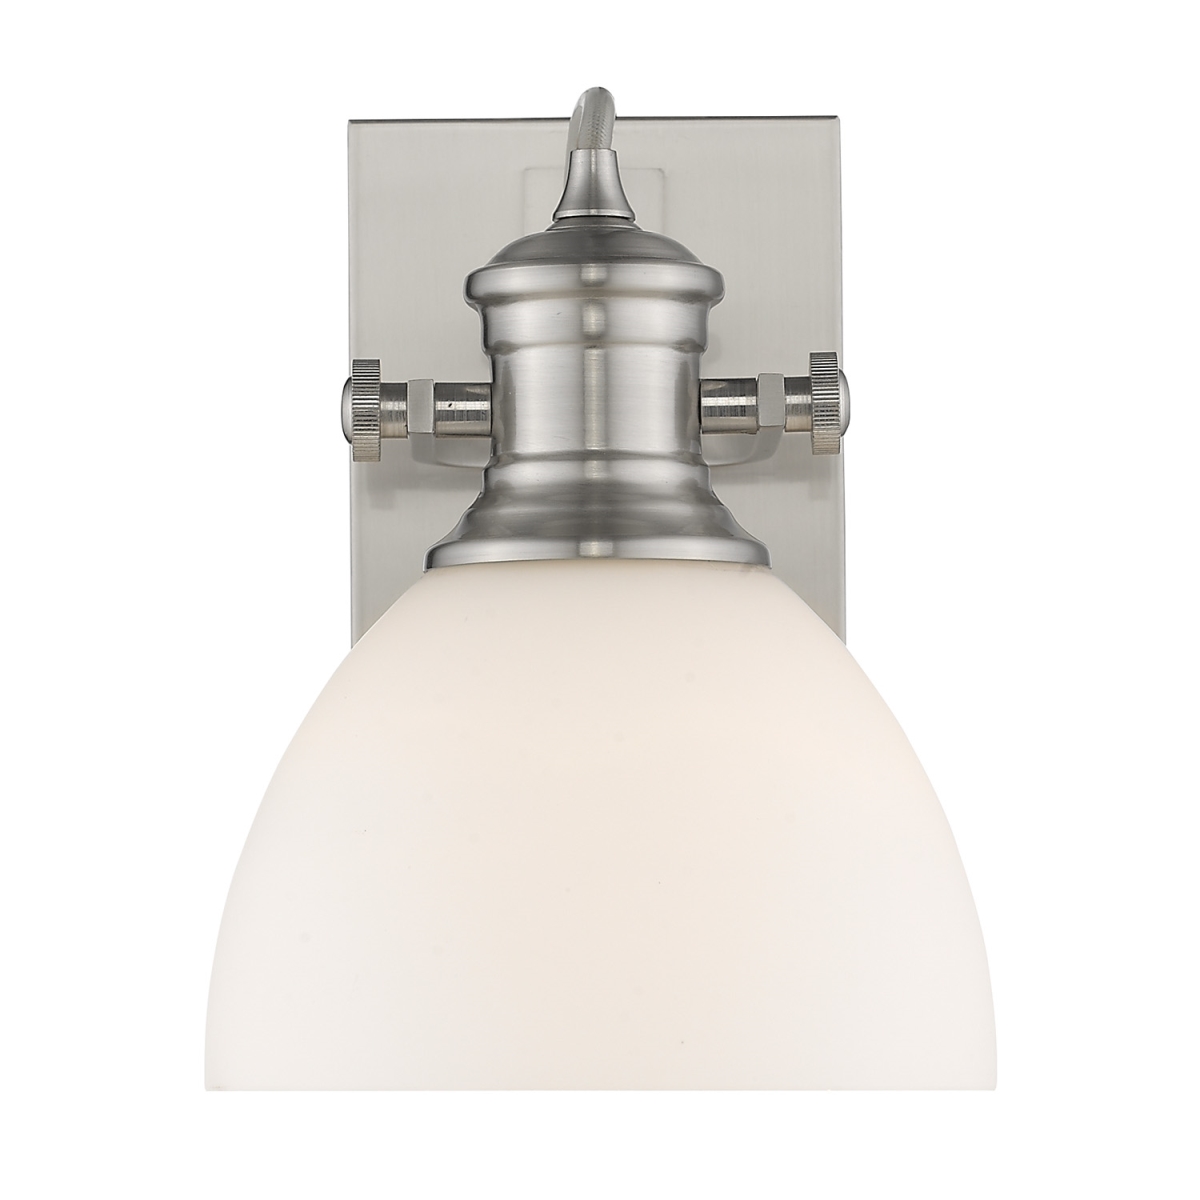 3118-ba1 Pw-op 7 In. Hines 1 Lights Pewter Bath Fixture Wall Light With Opal Glass, Silver - 120v